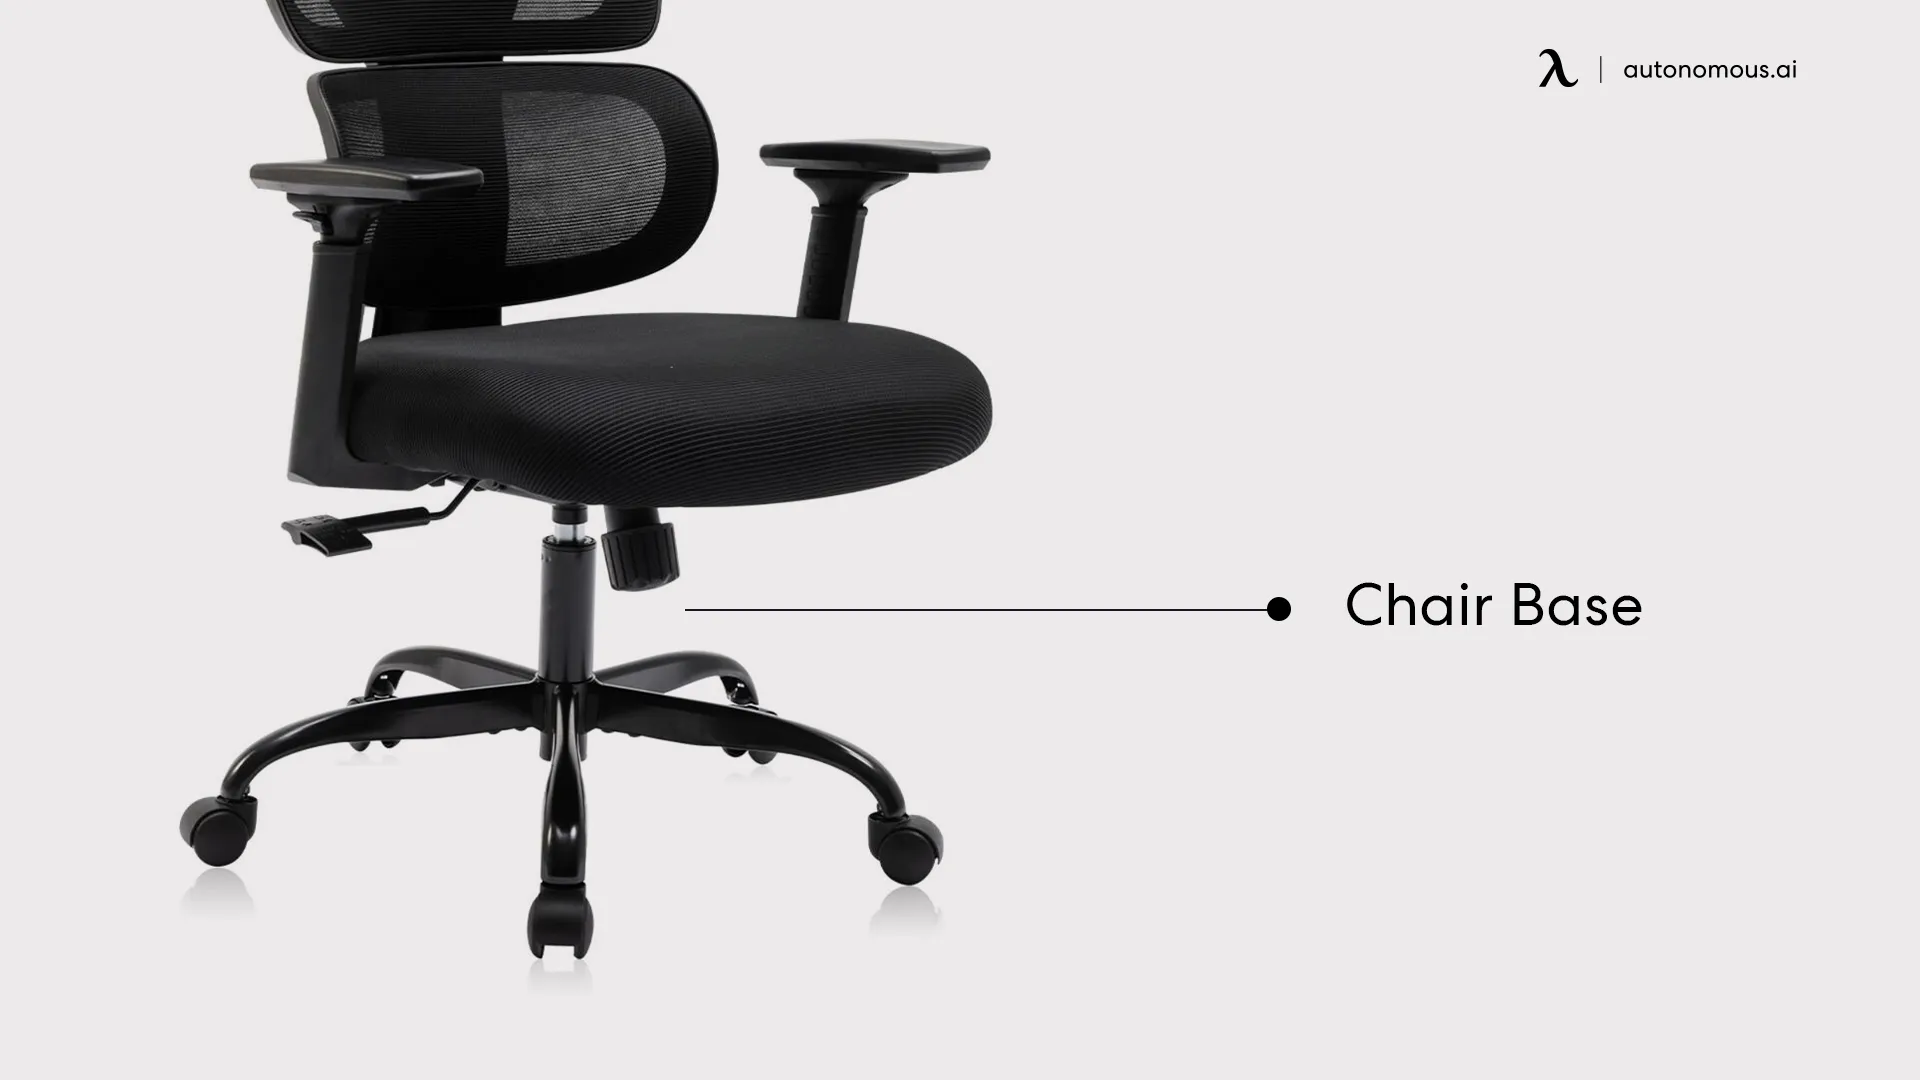 Chair Base to replace office chair